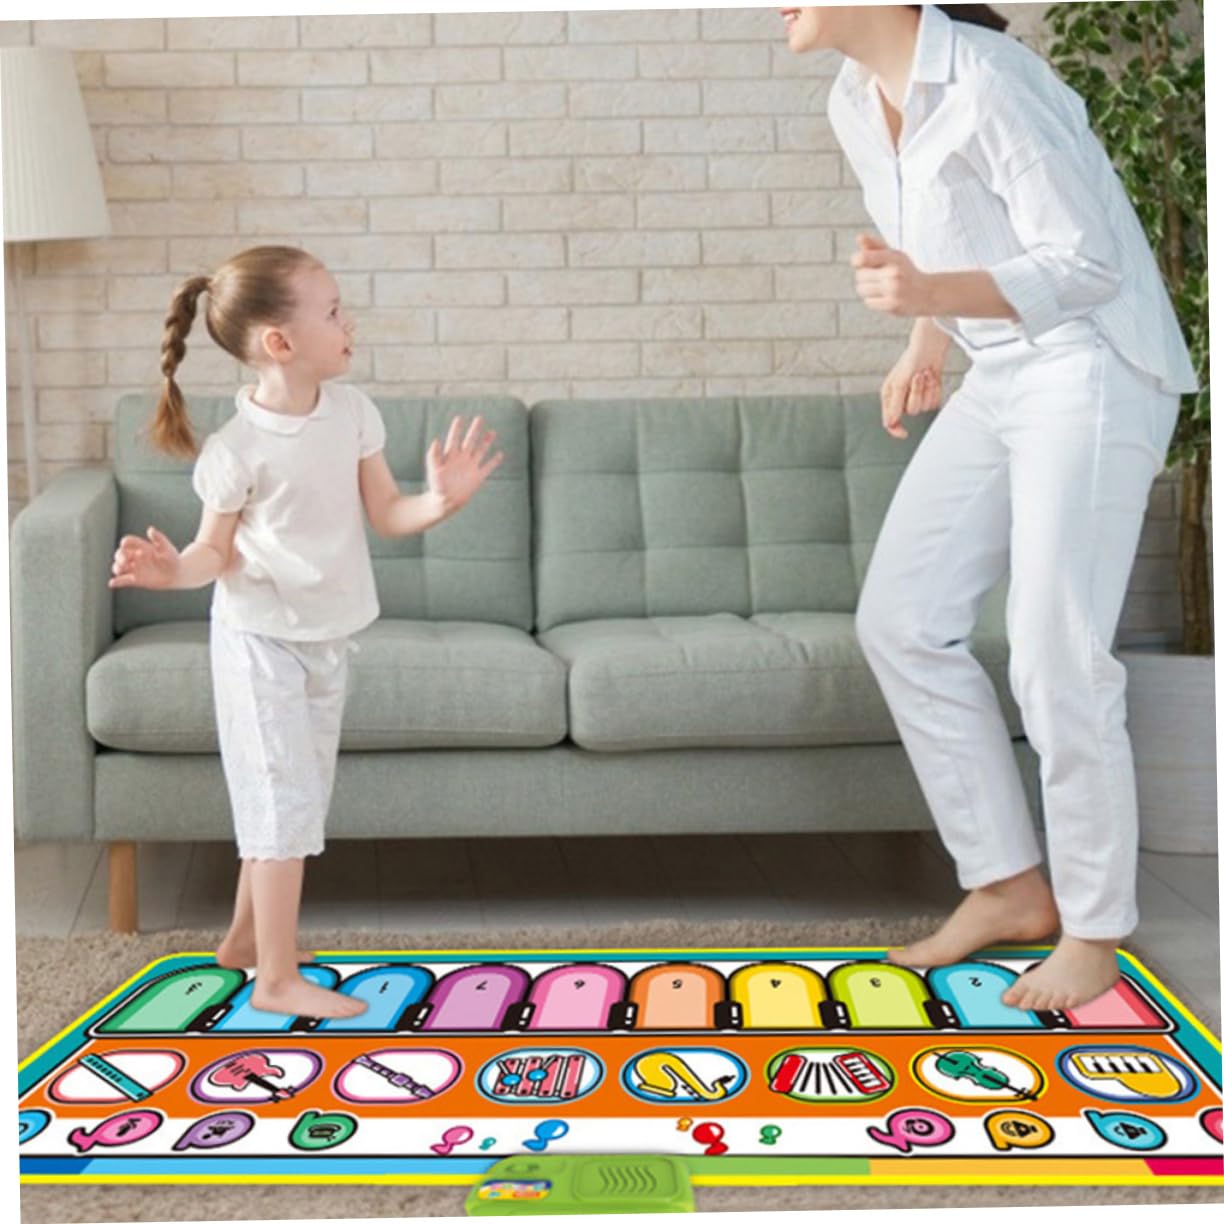 ERINGOGO 3pcs Music Blanket Toys for Kids Baby Play Mat Piano Mats Music Rug Kids Rugs Baby Boy Toys Play Mat for Baby Kidcraft Playset Gym Pads Flooring Carpet Piano Rug Electric Child